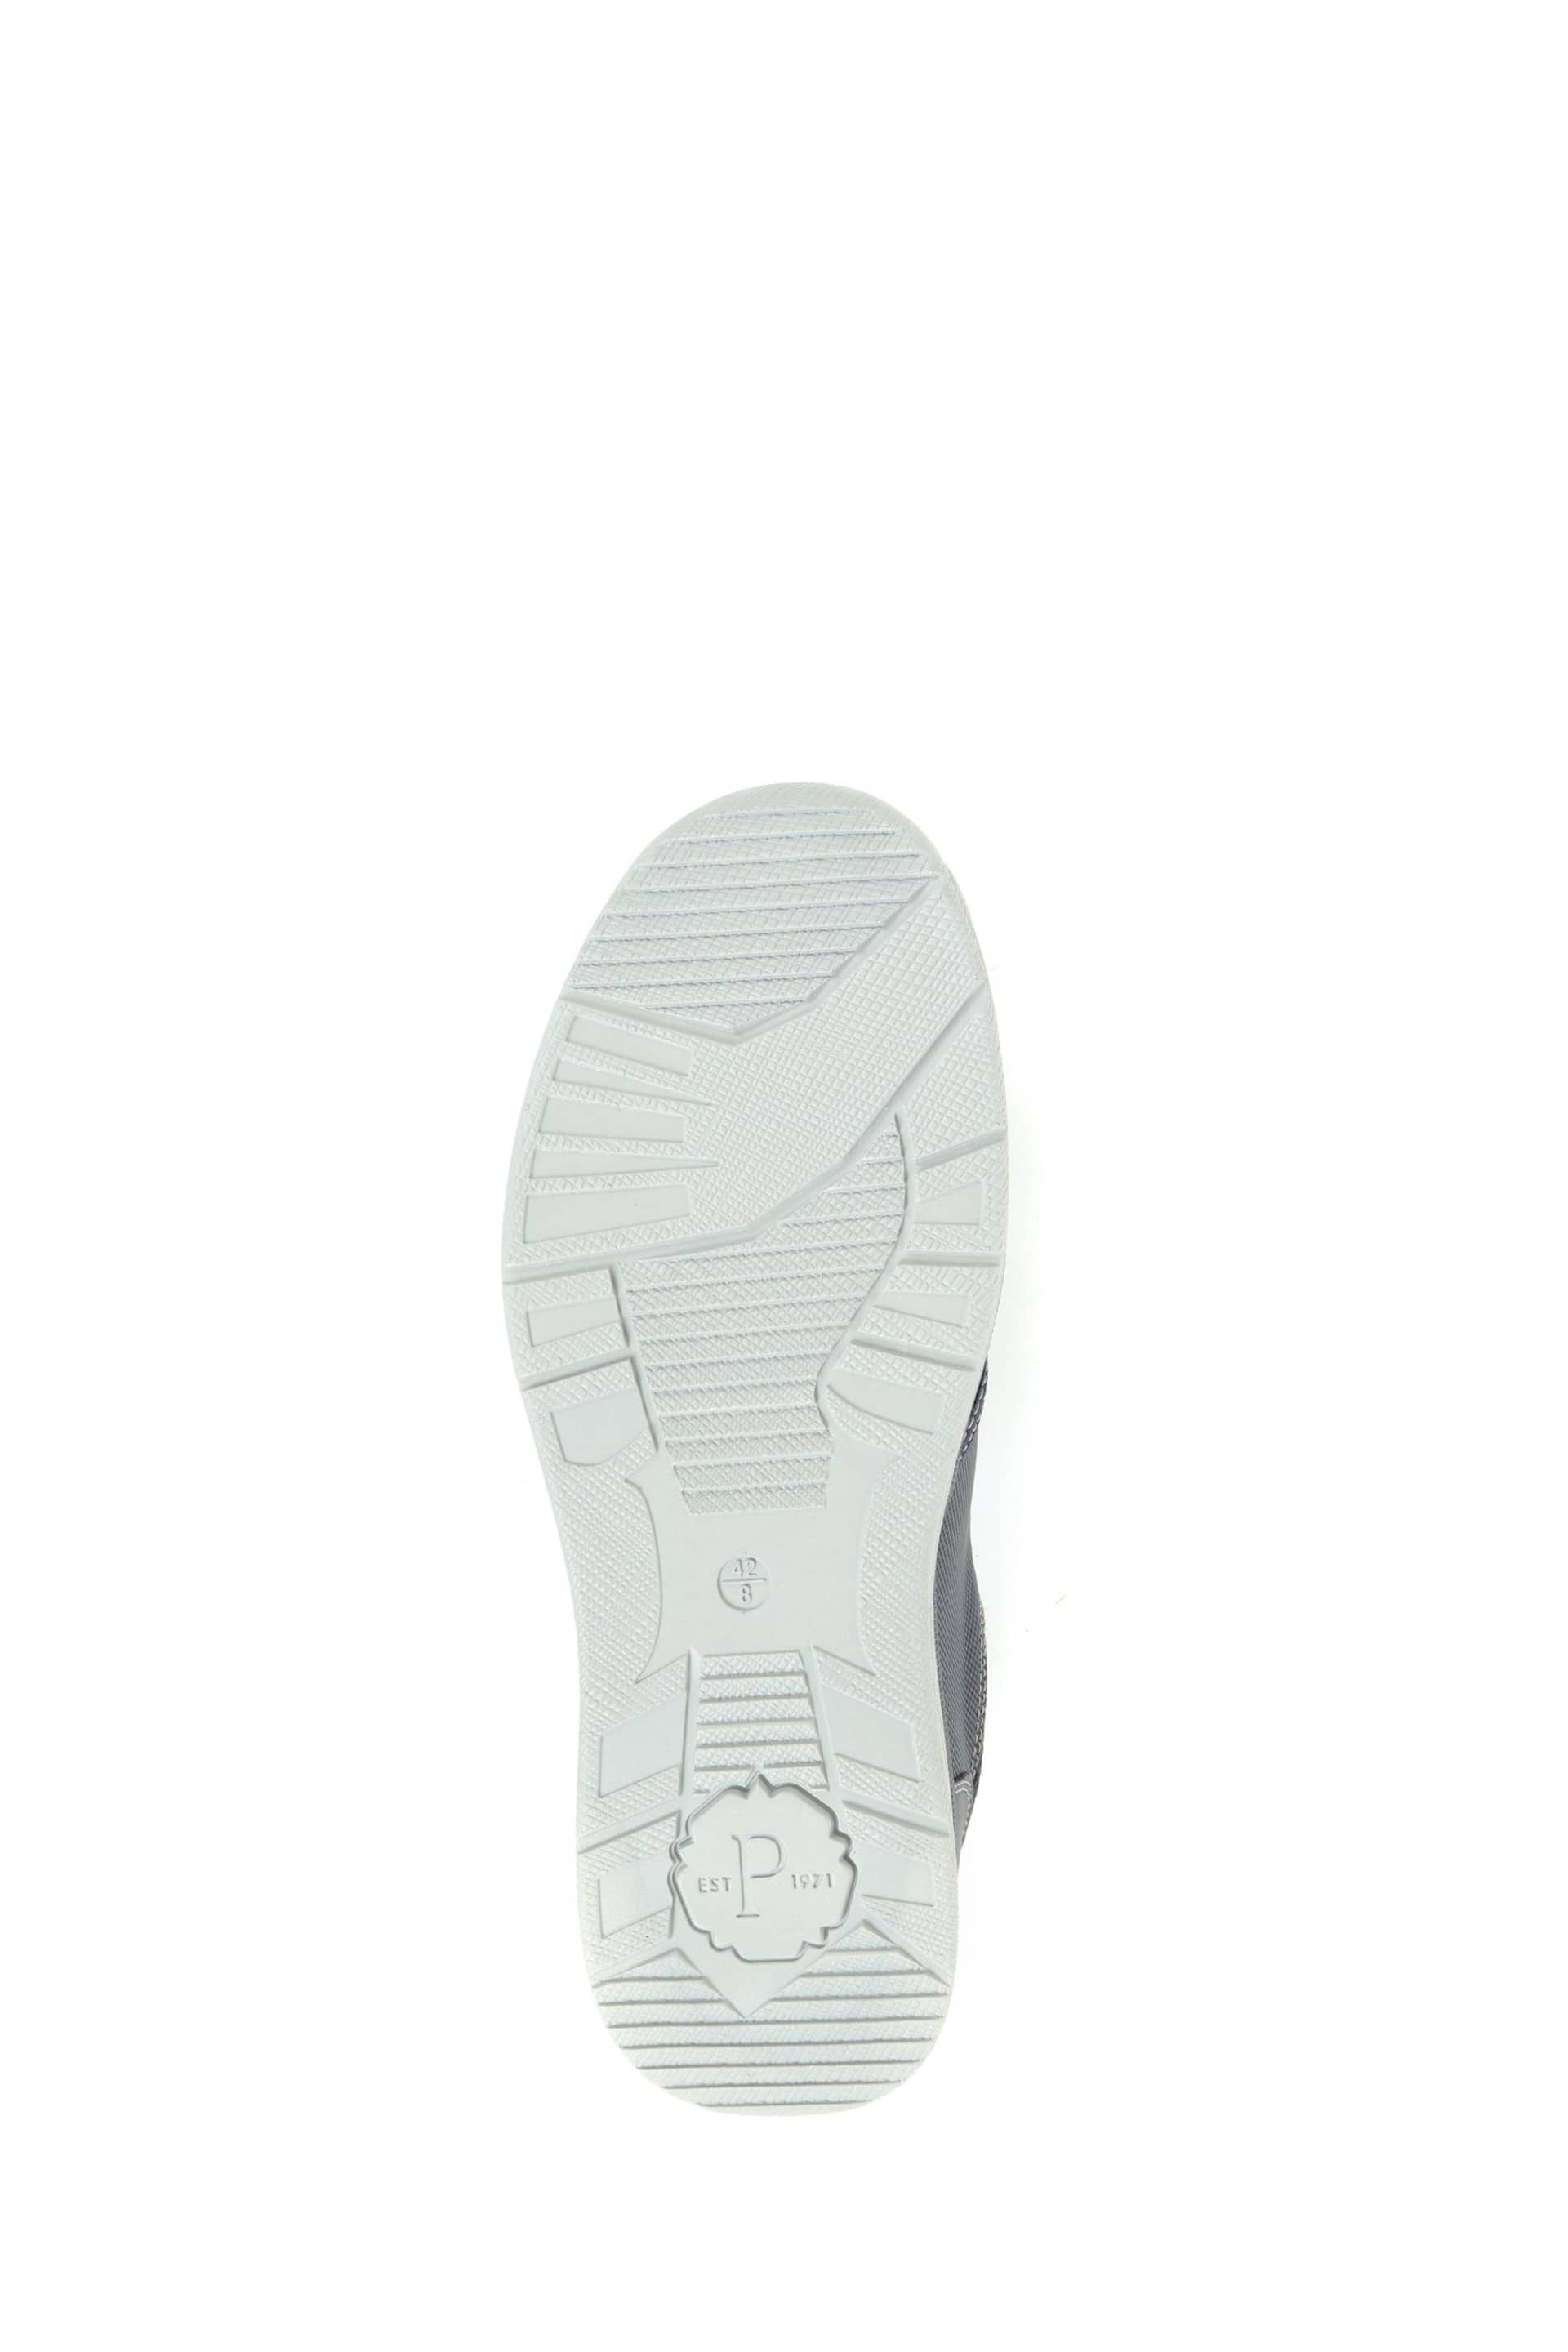 Pavers Slip-On Mesh Shoes - Image 5 of 5